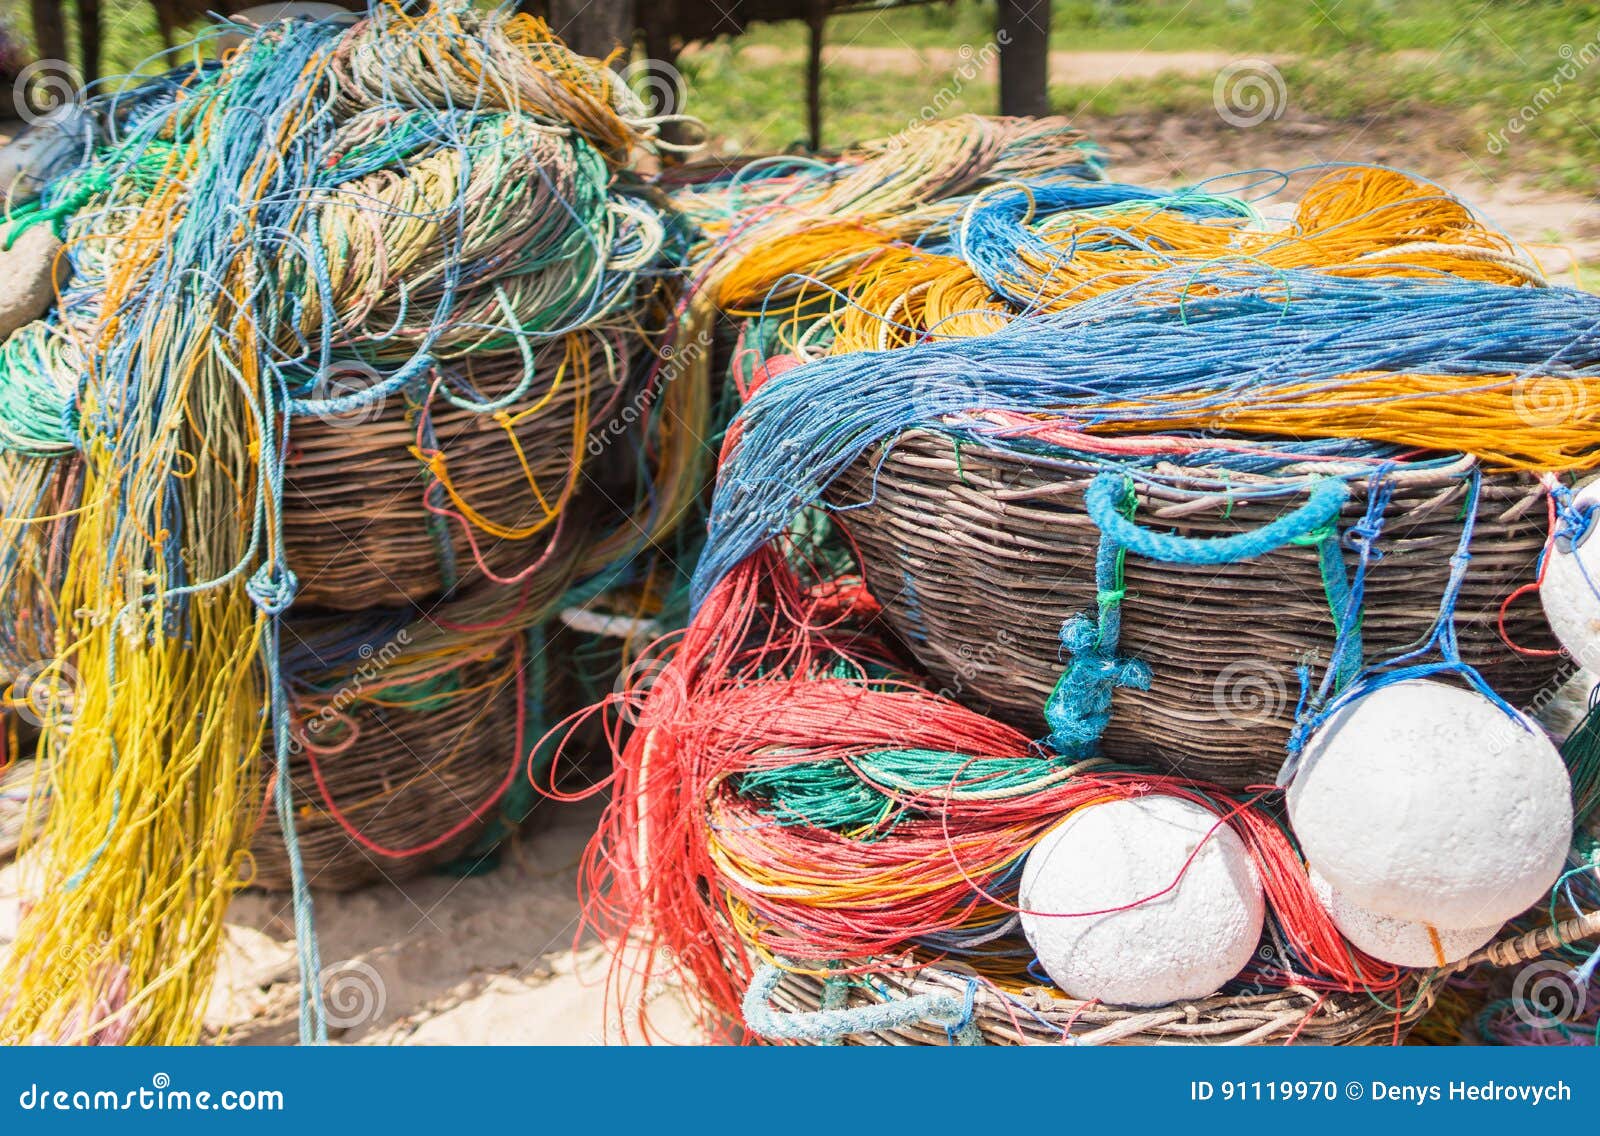 Color Fishing Net, Floats, Nylon Rope in the Basket on the Bank